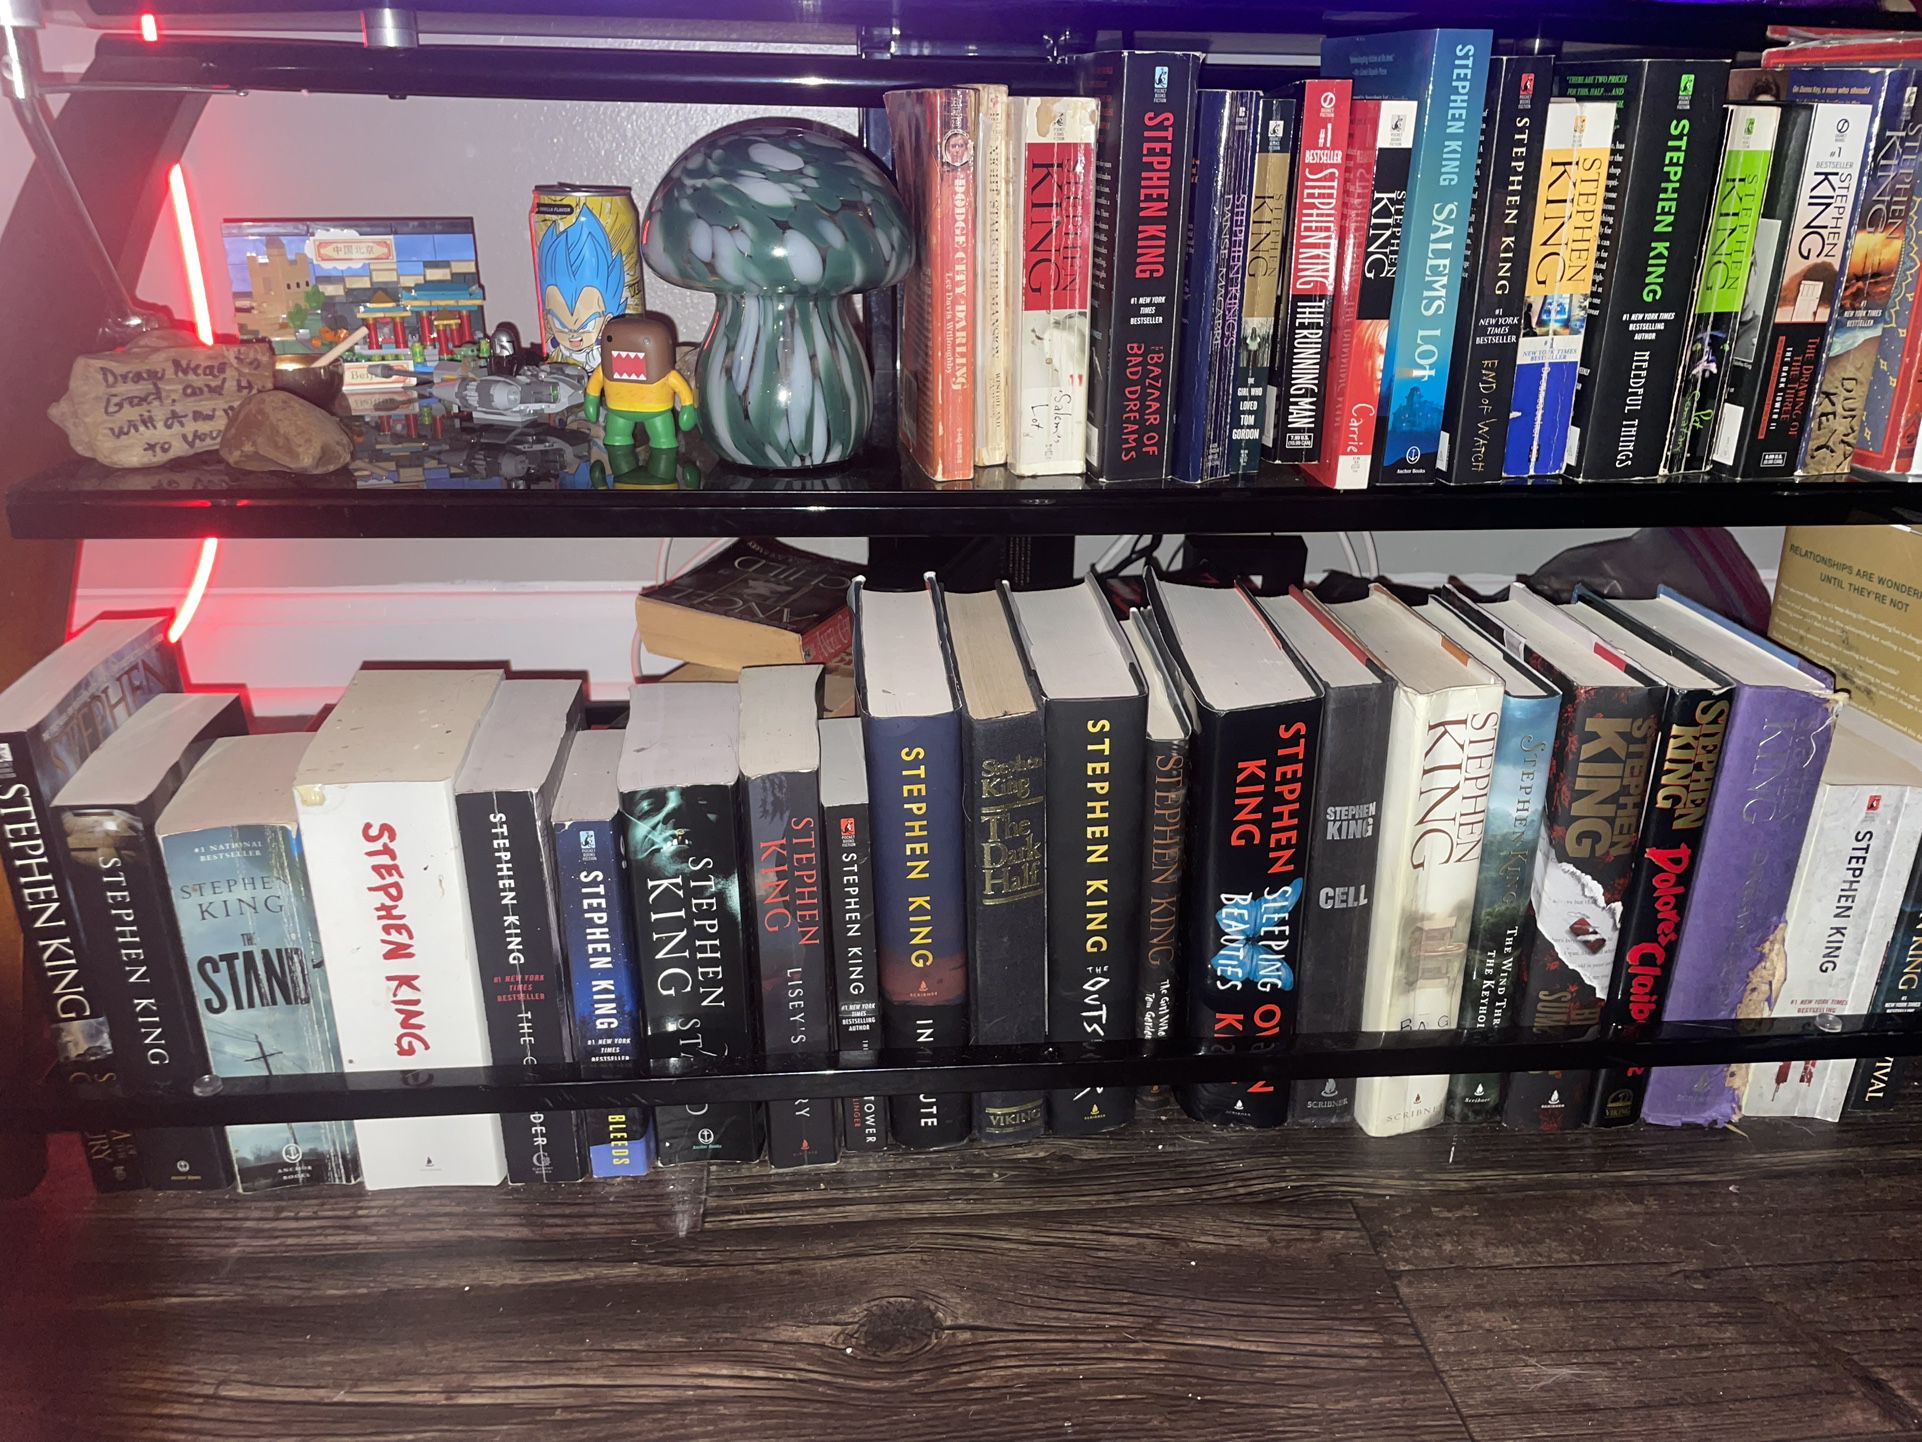 Books (Stephen king collection)